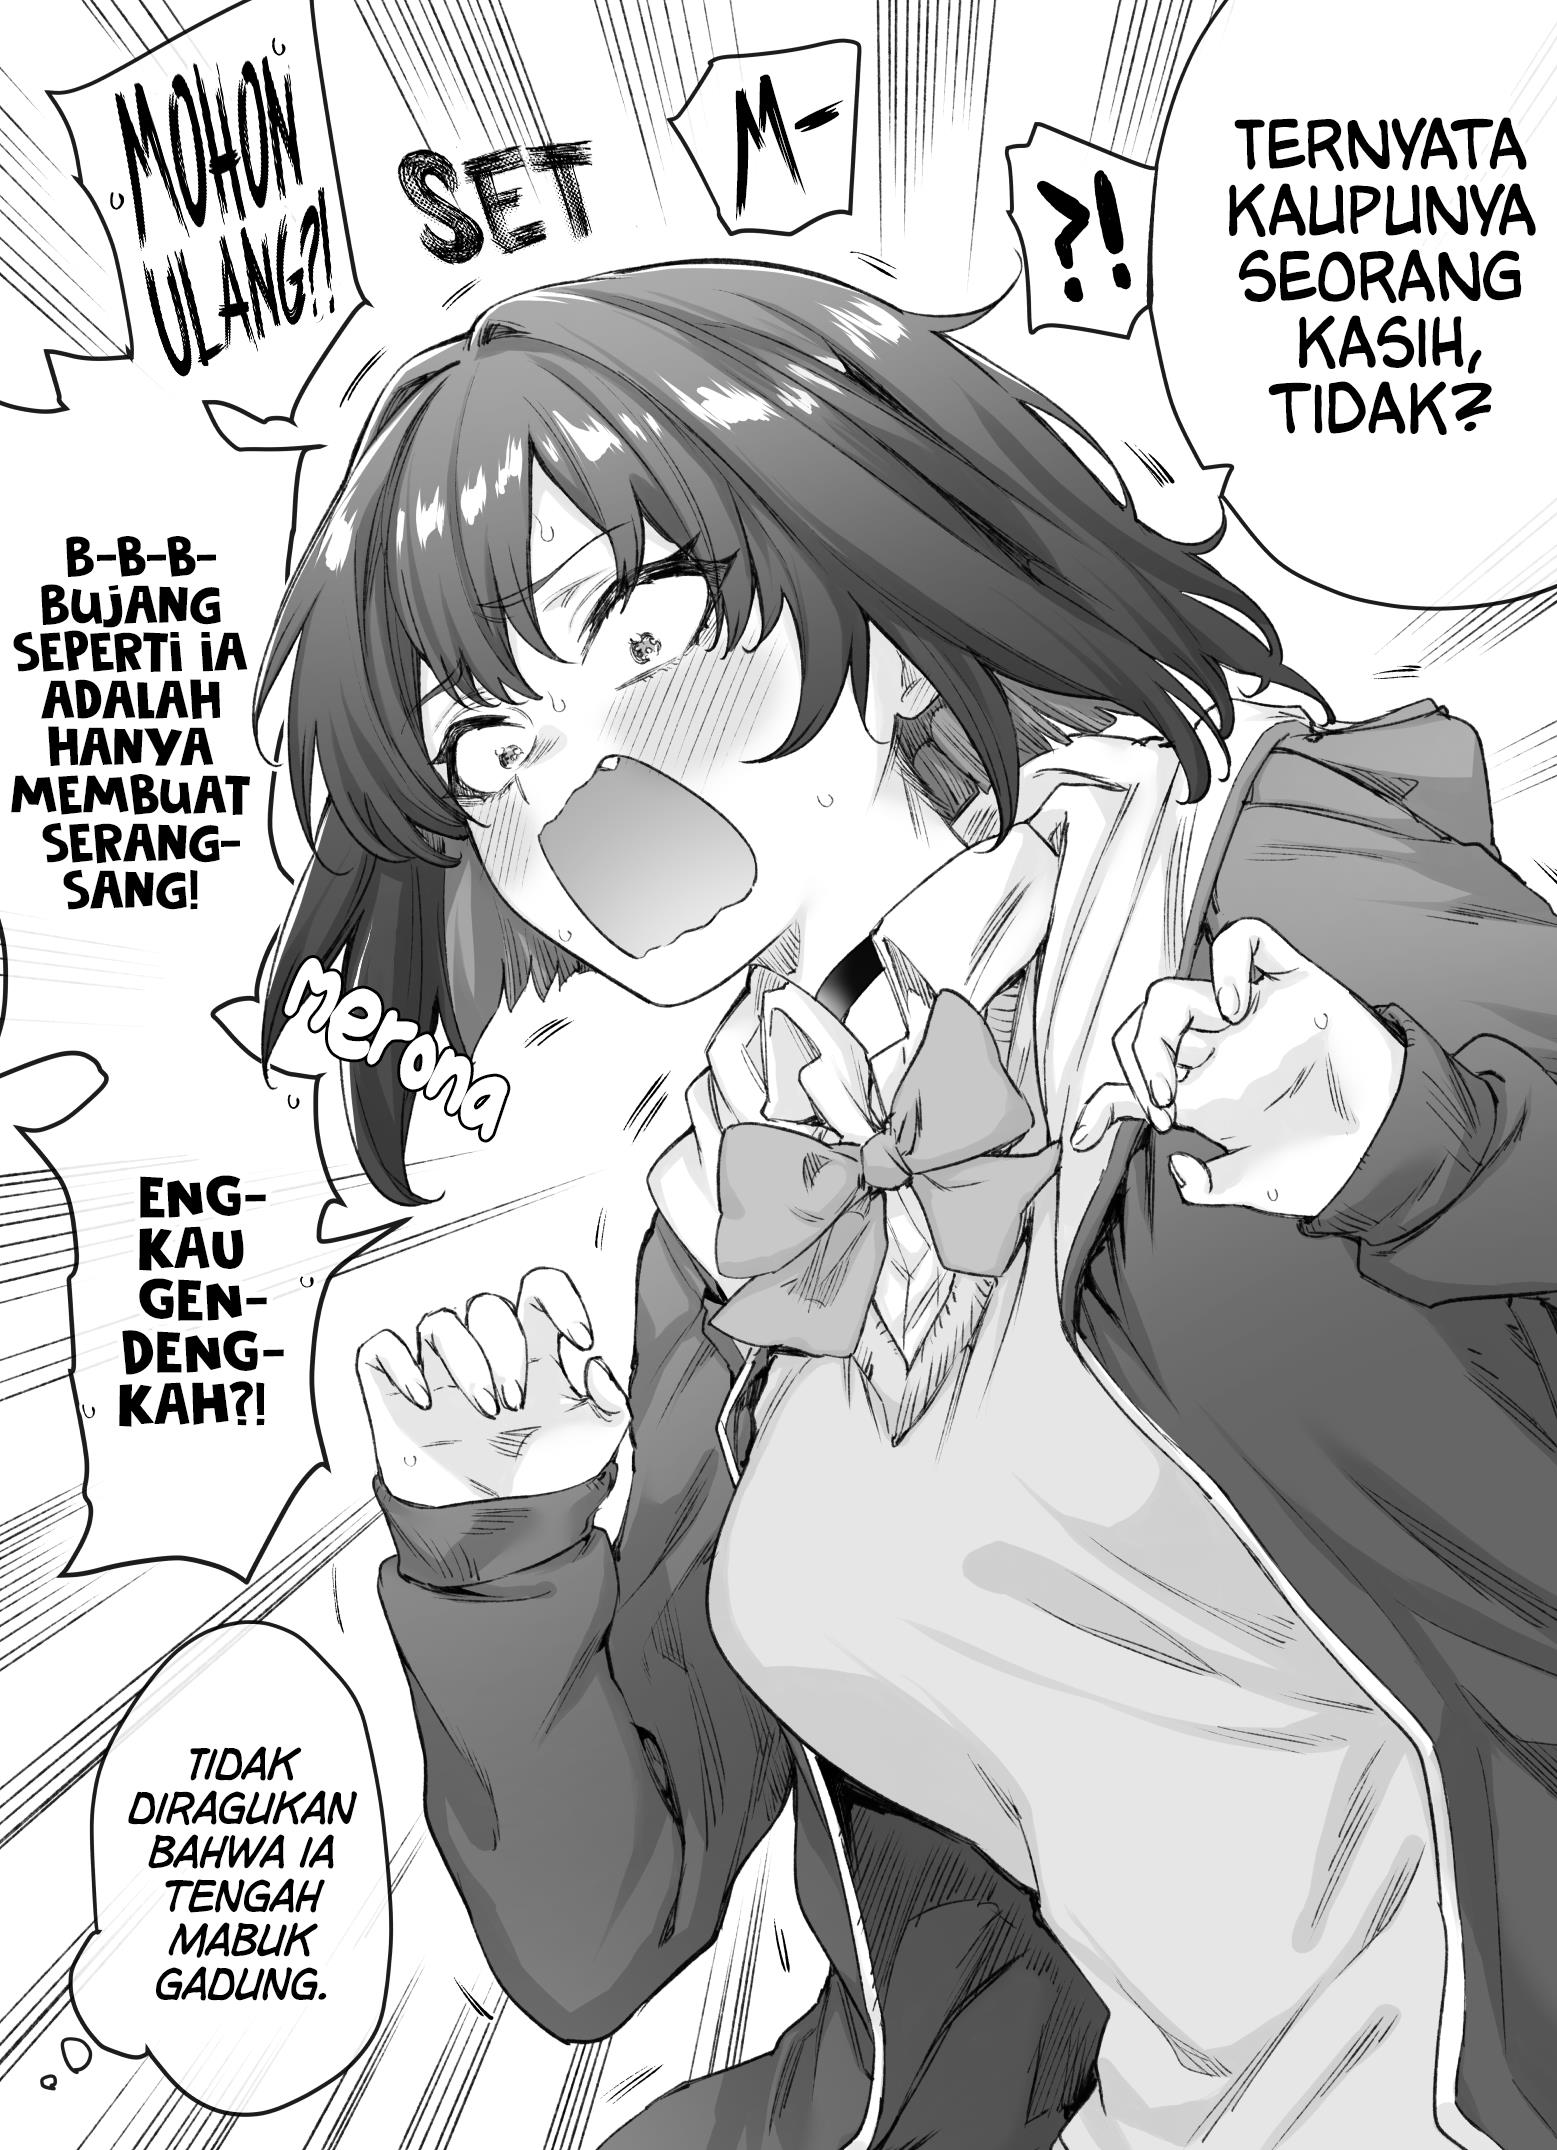 The Tsuntsuntsuntsuntsuntsun tsuntsuntsuntsuntsundere Girl Getting Less and Less Tsun Day by Day Chapter 13.1